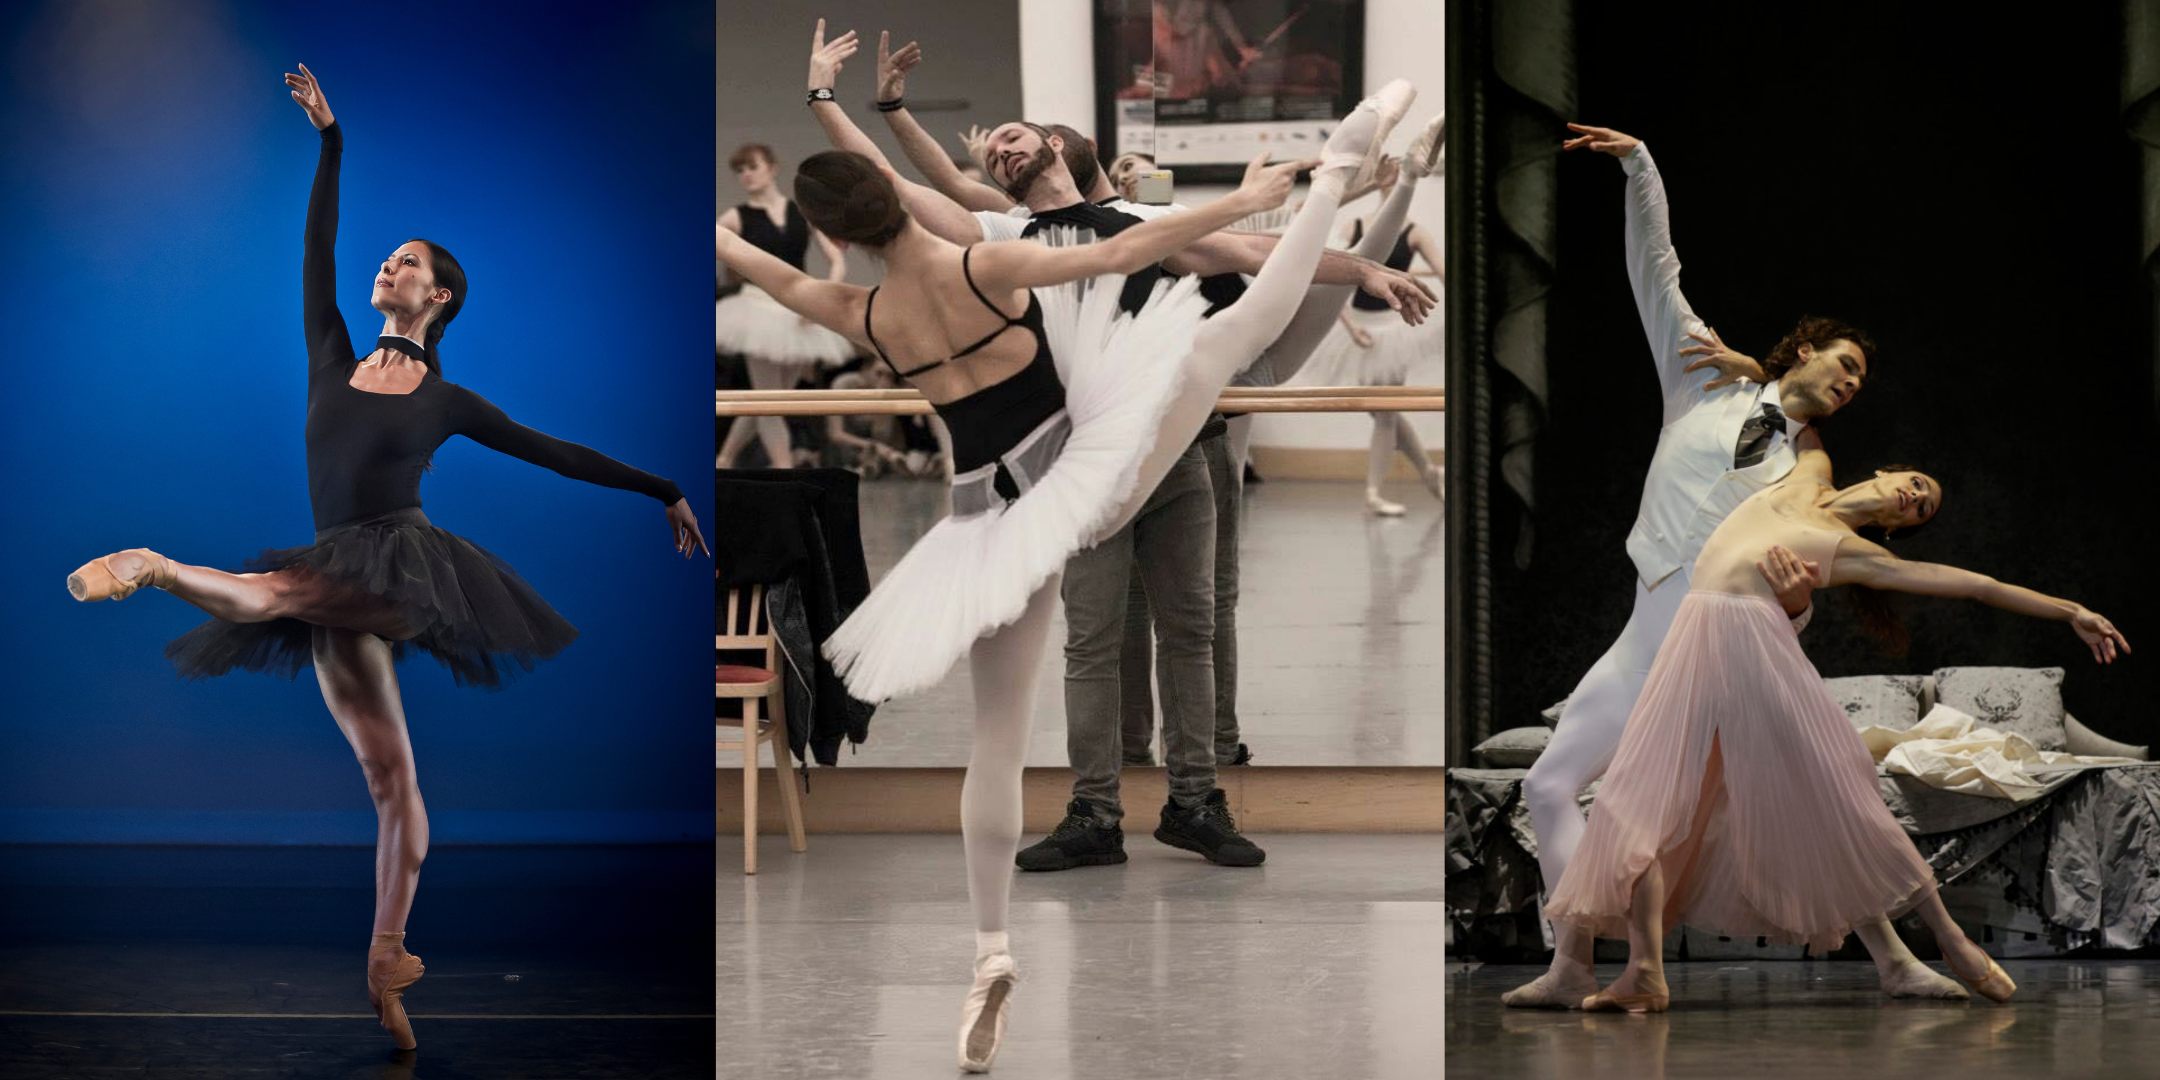 From left: Elisa Carrillo Cabrera poses on pointe with her left leg held devant, wearing a black tutu; photo by Carlos Quezada. Stanislav Fečo leading rehearsal at Slovak National Theatre Ballet; photo by Peter Brenku. Hugo Marchand and Dorothée Gilbert in Le Rouge et le Noir; photo by Svetlana Loboff, courtesy Paris Opéra Ballet.